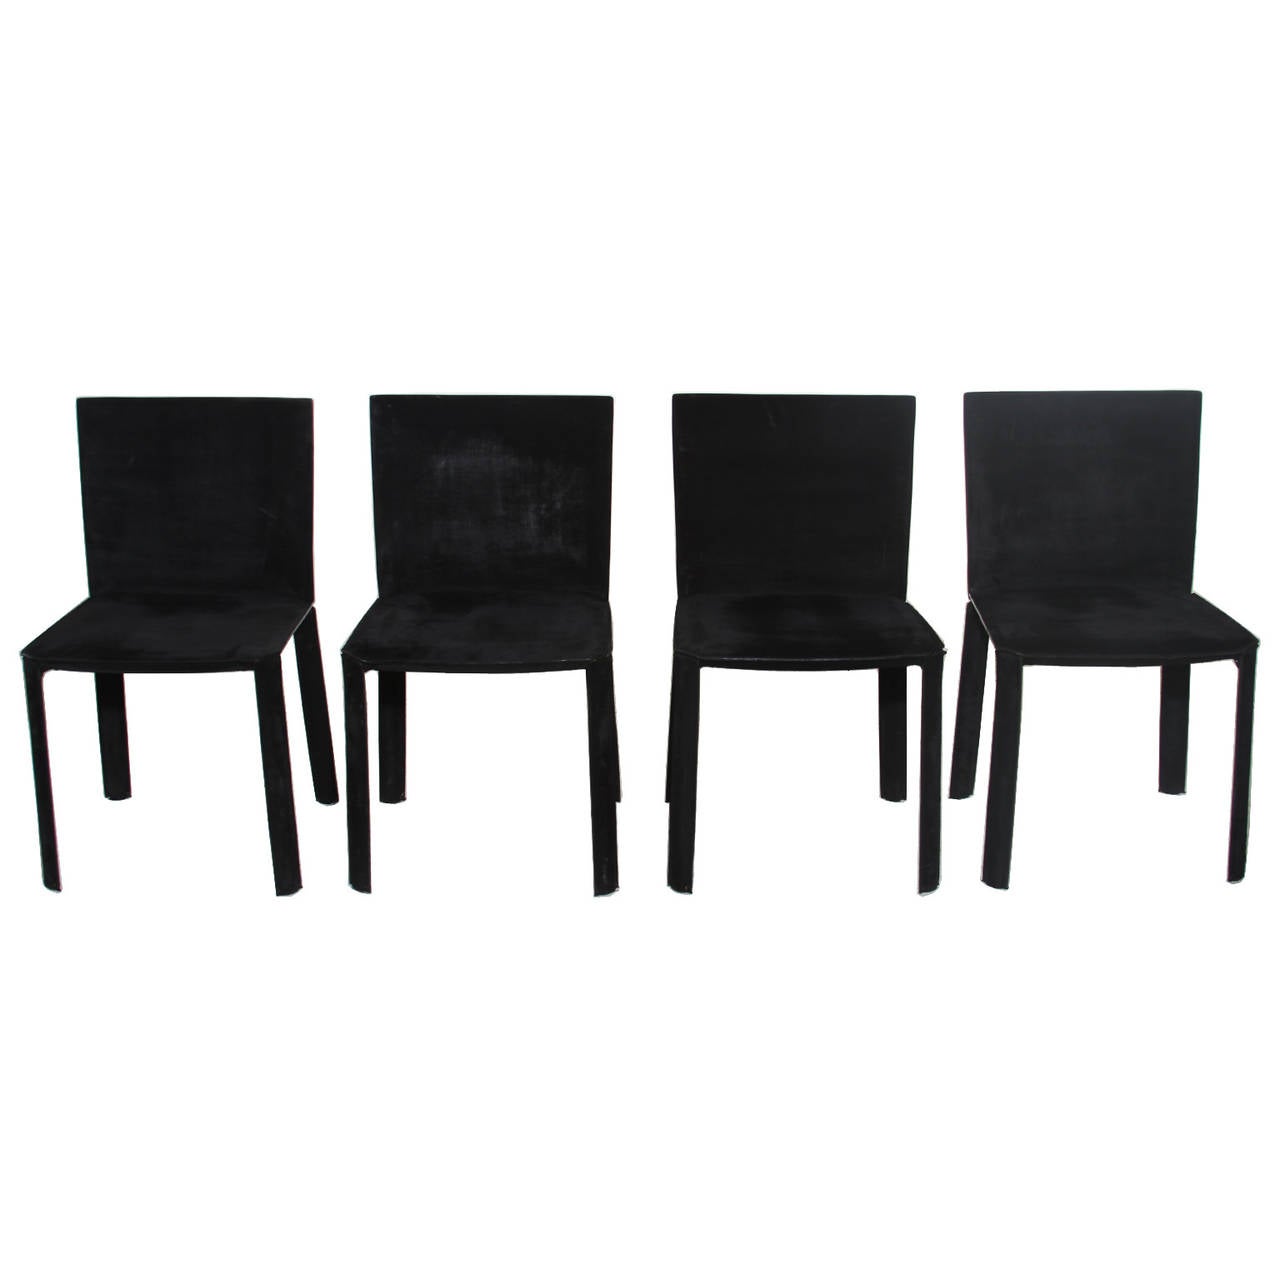 A beautiful set of four dining chairs from Brazil. The chairs are very simply designed and have an elegant look. The chairs are steel frames wrapped in a belt thickness black leather with a suede like appearance and feel. Leather has been burnished